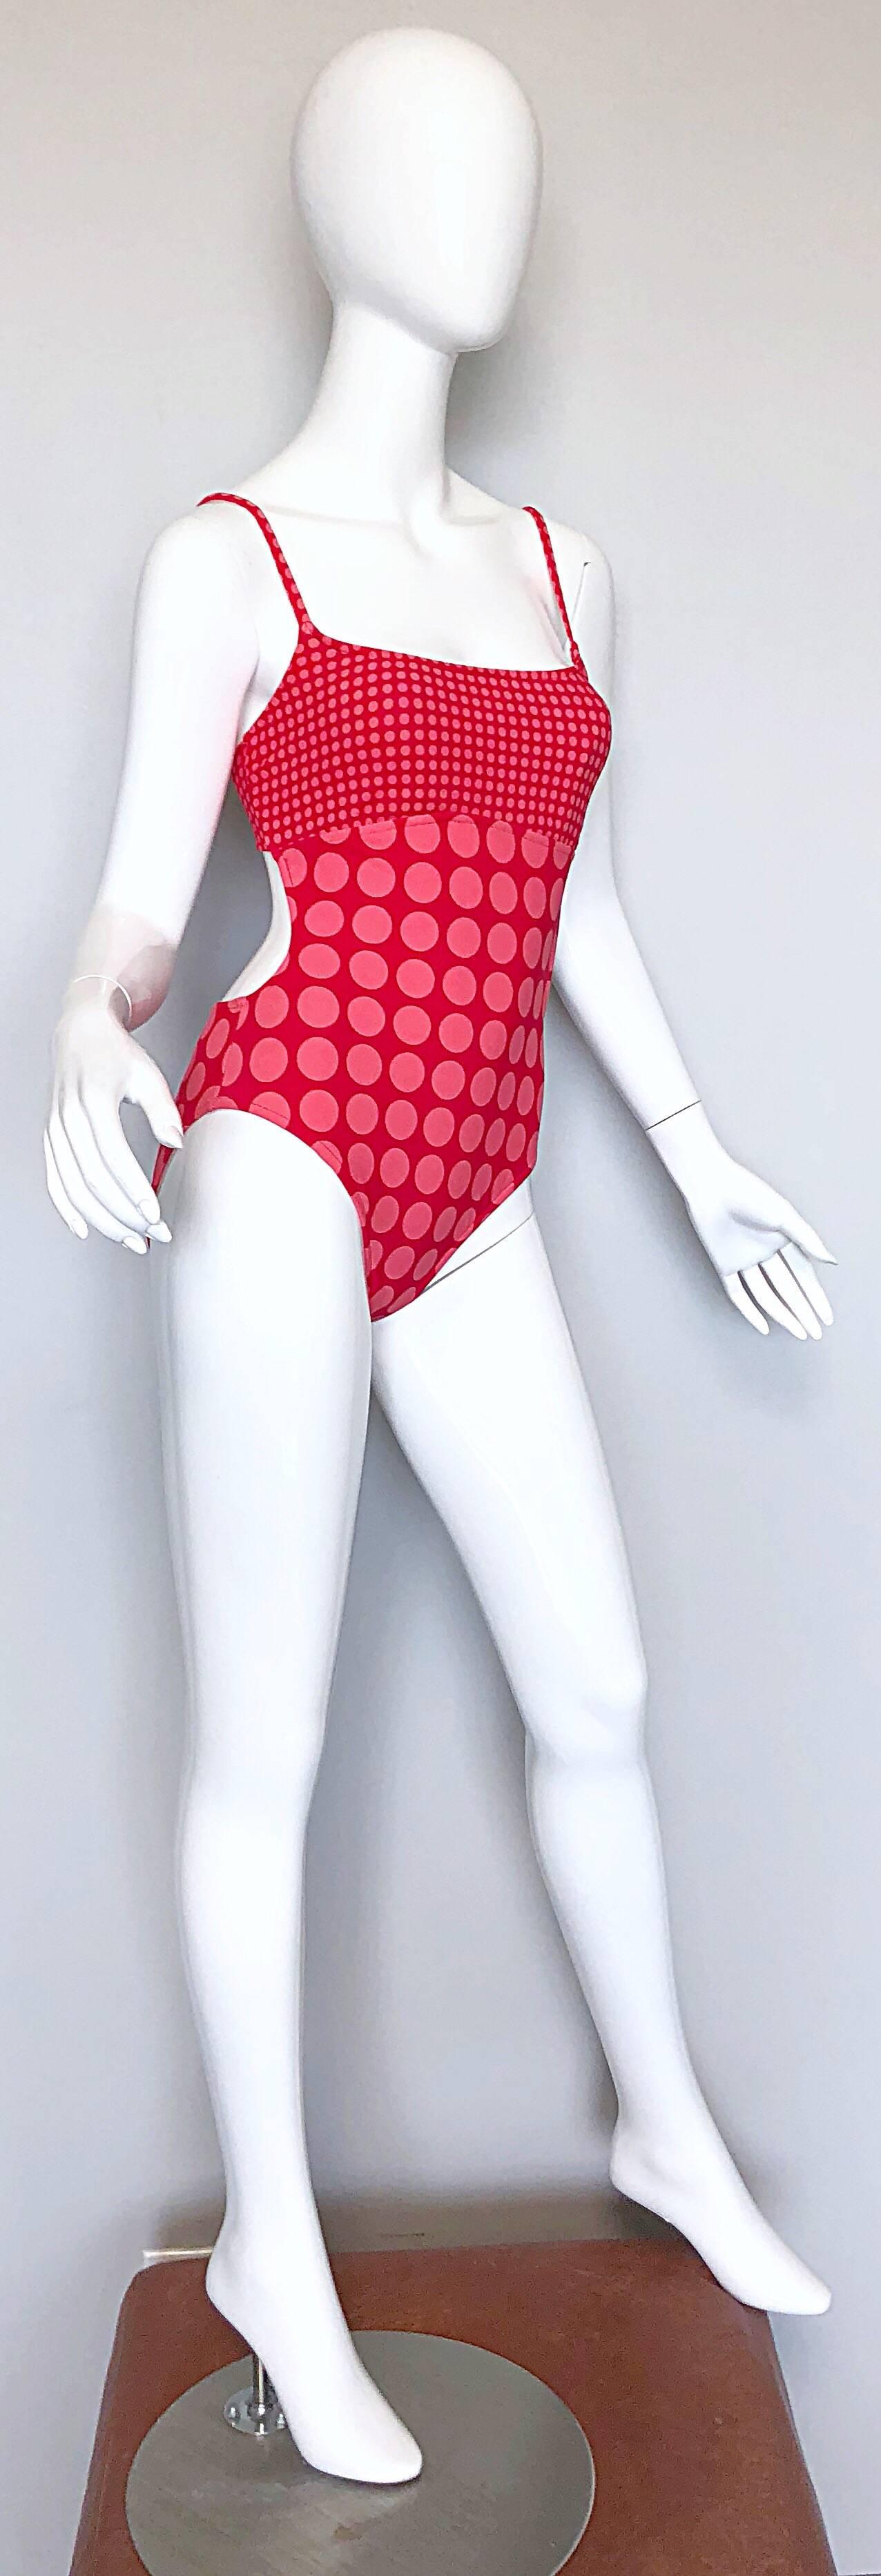 Bill Blass Vintage Cut Out 1990s Pink Red Polka Dot One Piece Bodysuit Swimsuit  For Sale 1